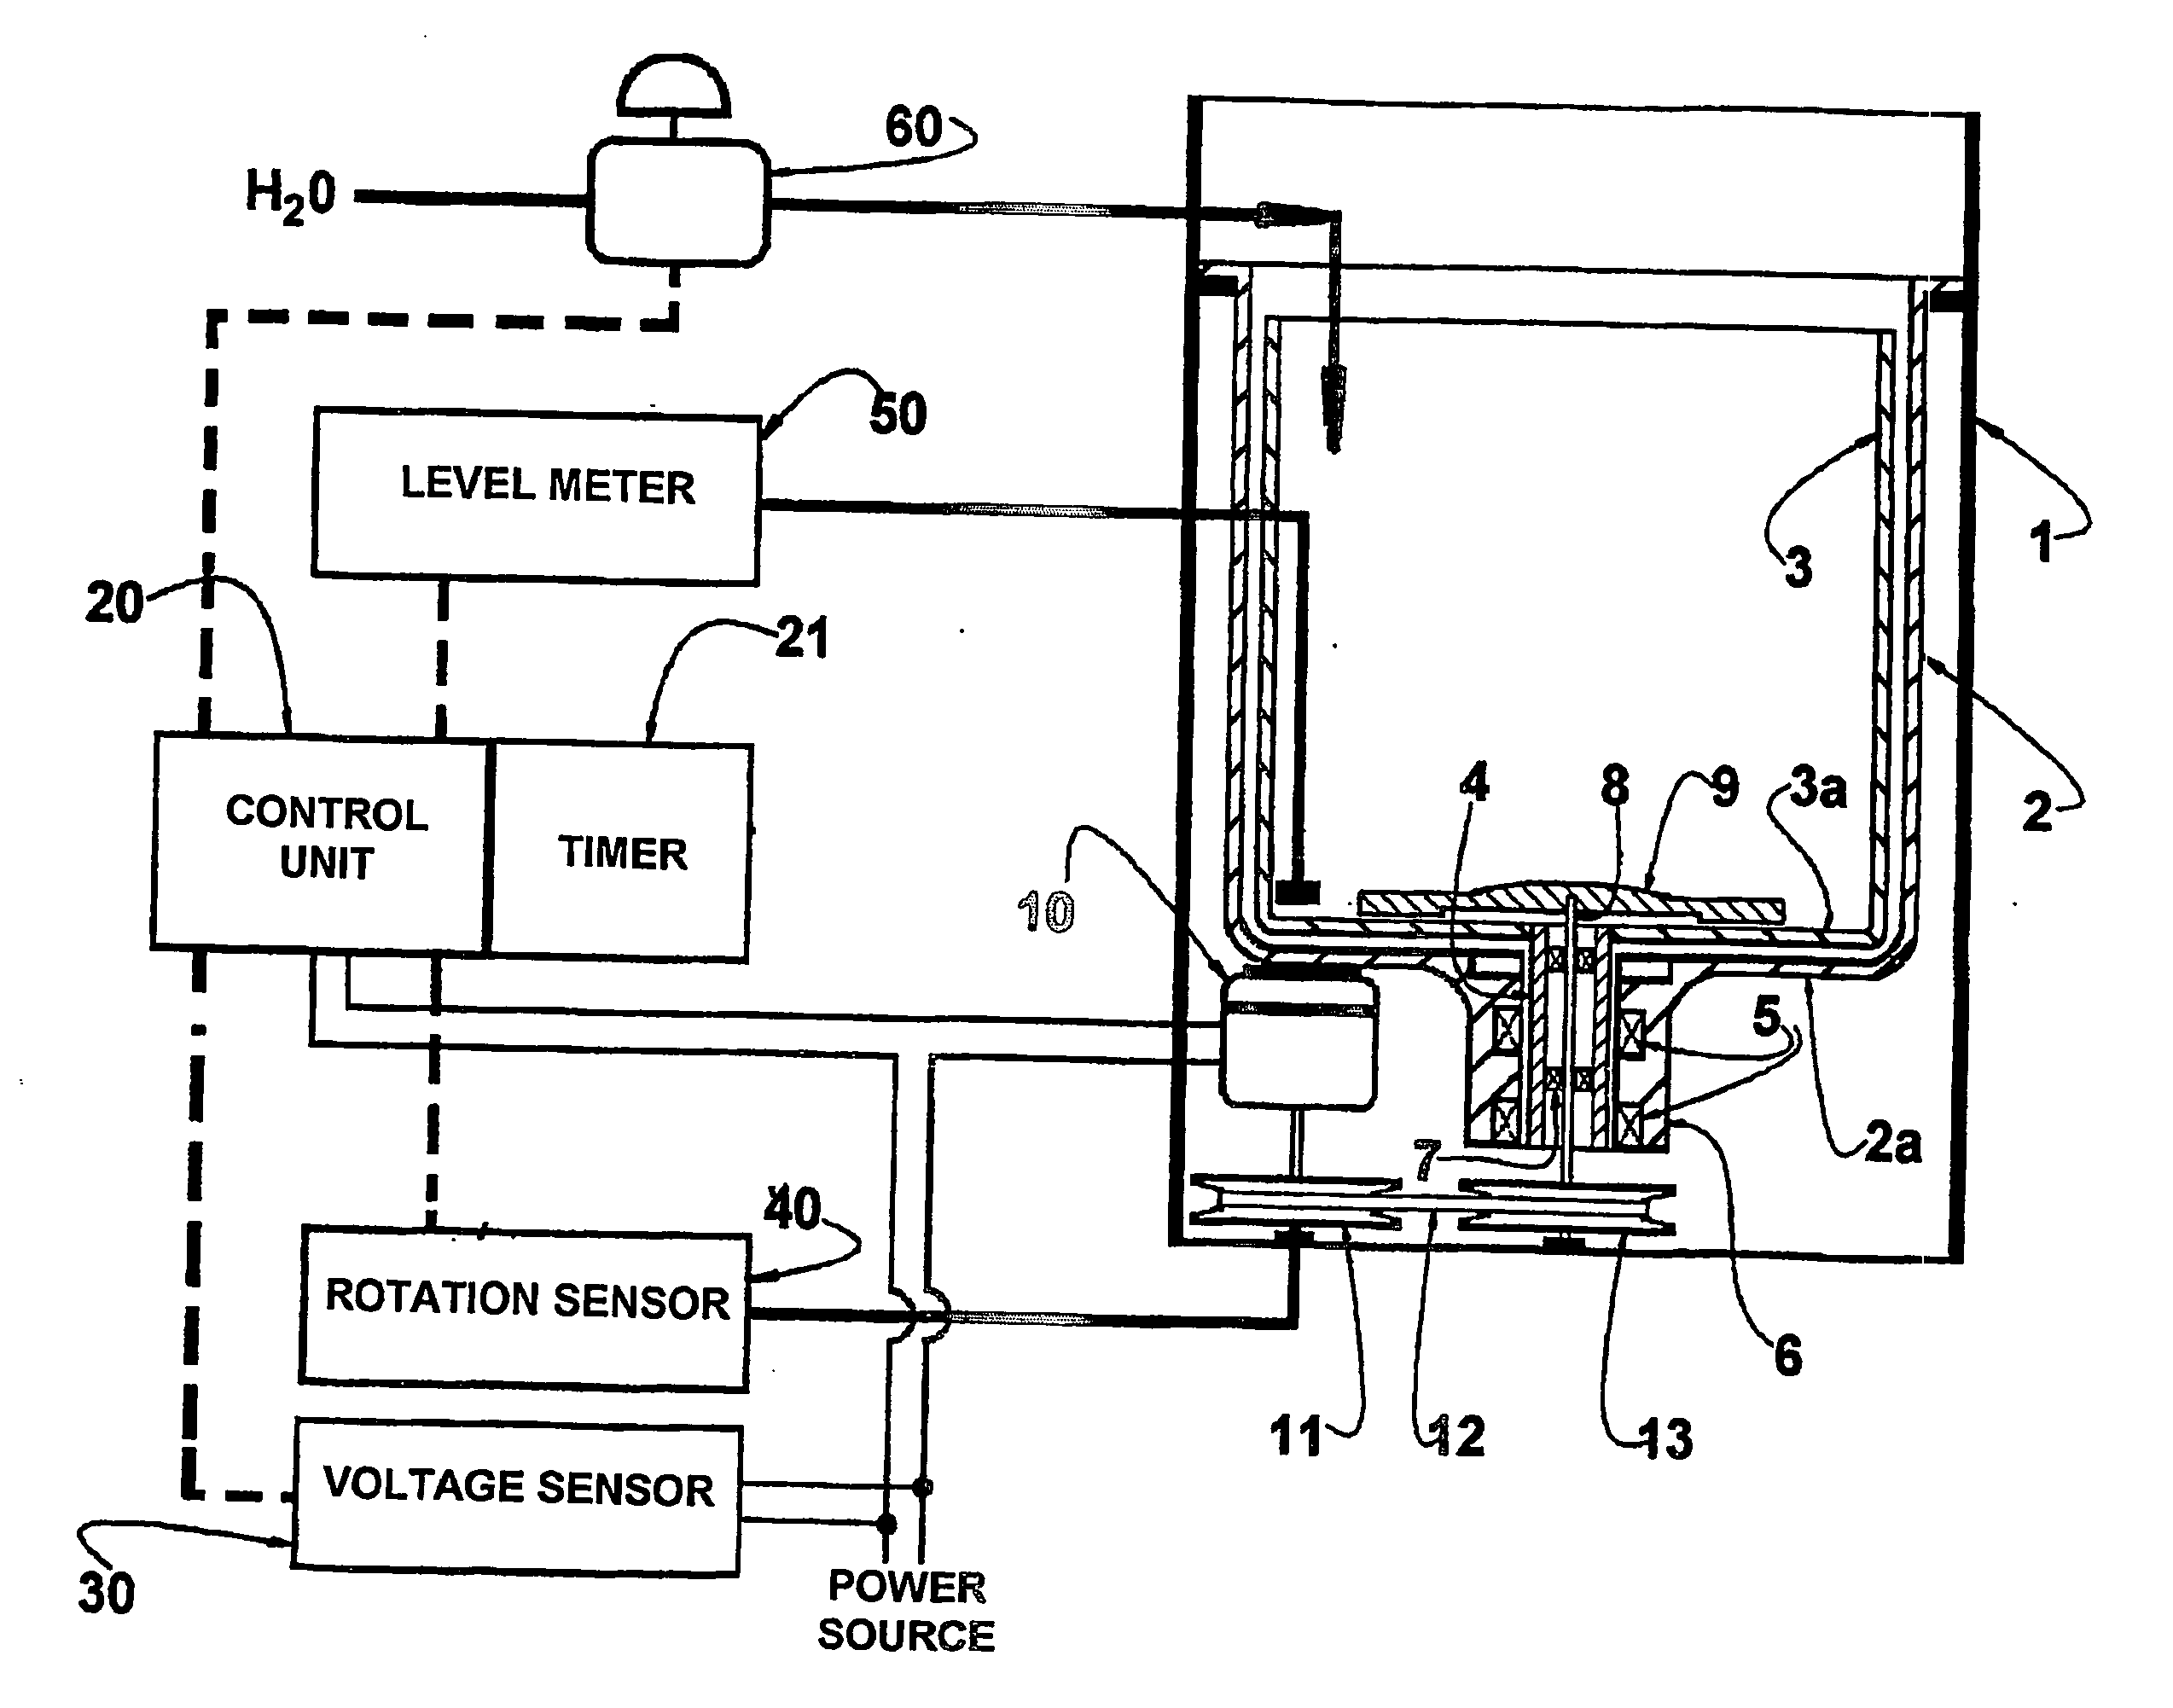 System and process for detecting a load of clothes in an automatic laundry machine